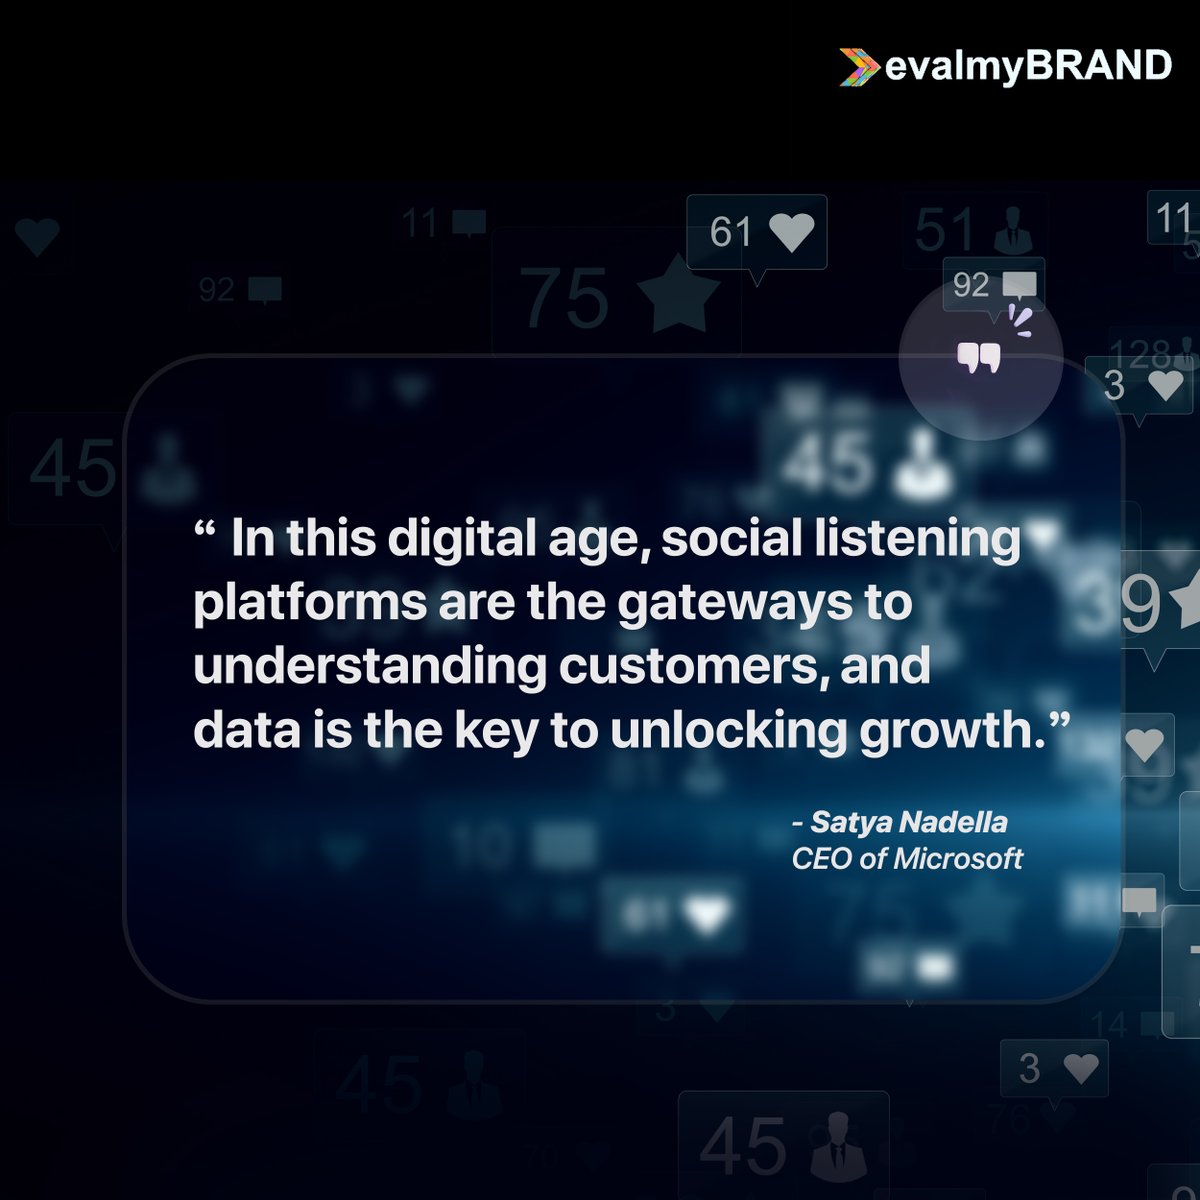 Don't miss this opportunity to level up your brand in the digital realm.

Take a demo now (evalmybrand.com/getstarted) and embark on a journey of unparalleled customer insights and strategic success.

Follow @evalmybrand

#SocialListening #SocialMediaListening #CustomerSuccess